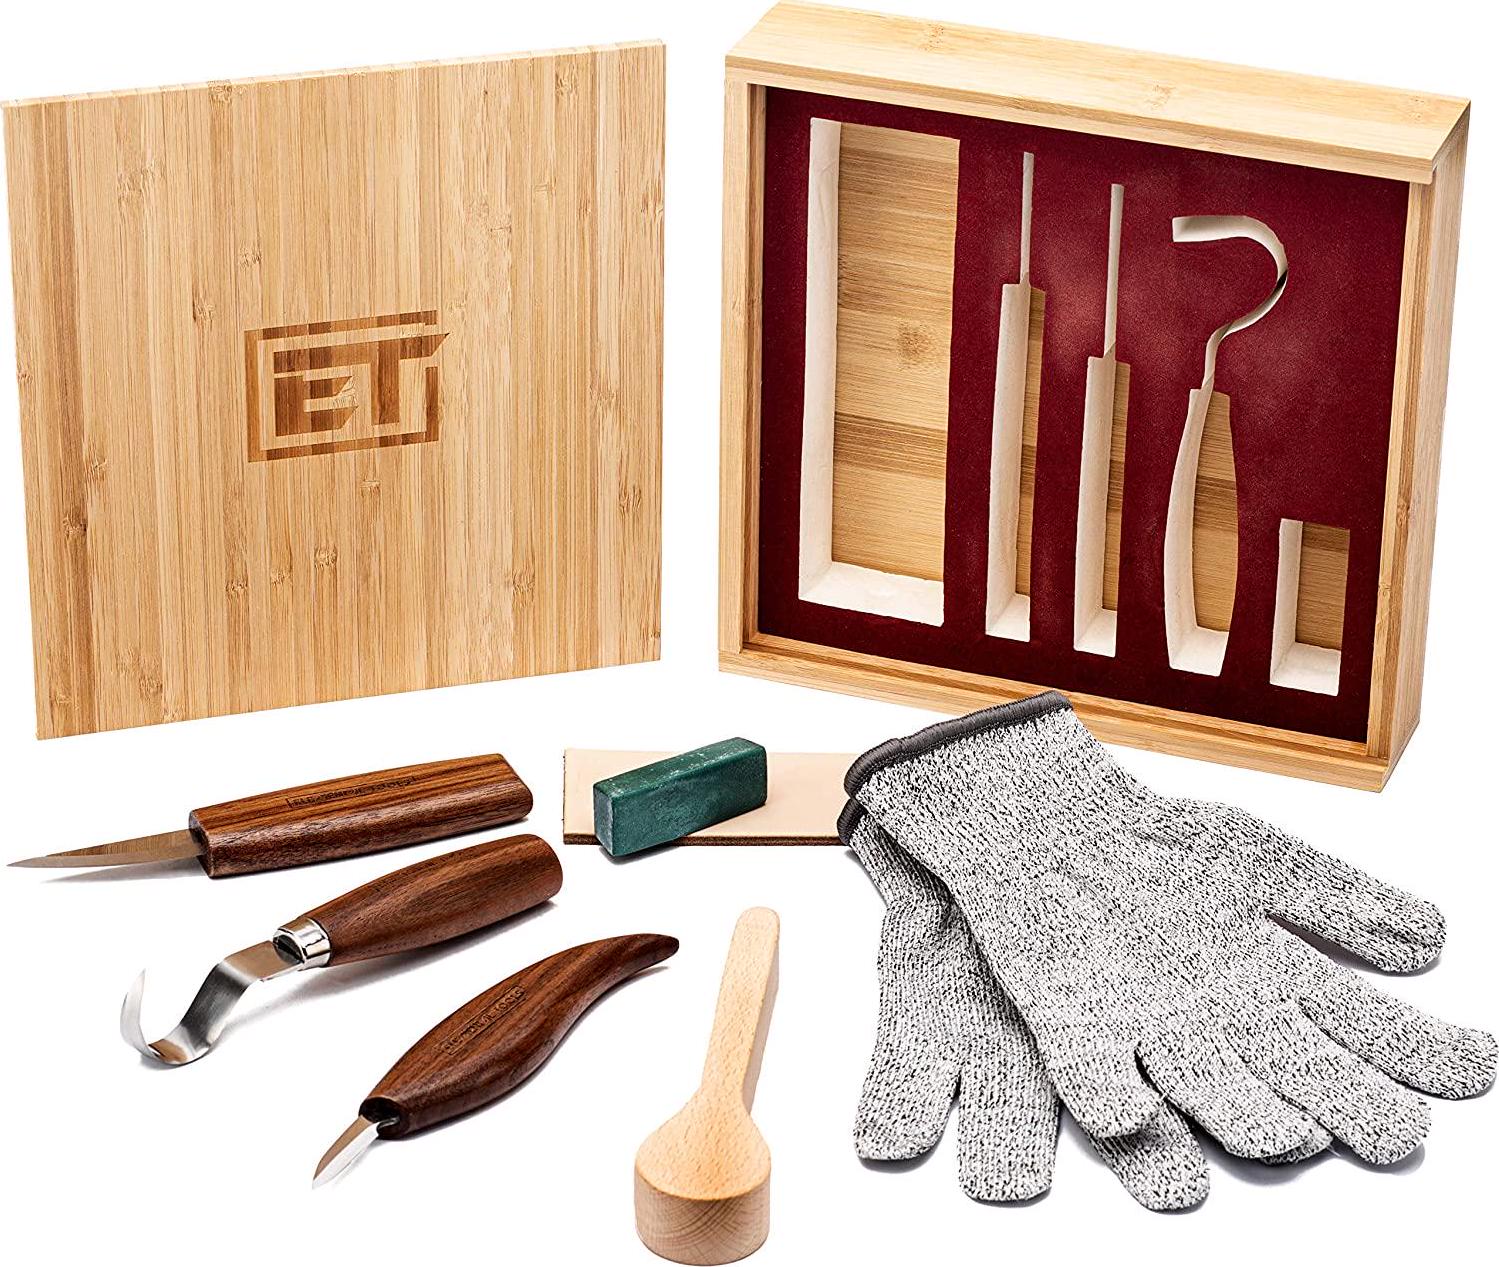 Elemental Tools, Elemental Tools 9pc Wood Carving Set - Hook Carving Knife, Whittling Knife, And Detail Wood Knife For Spoon, Bowl, Kuksa Cup Or General Woodwork - Bonus Cut Resistant Gloves And Bamboo Gift Box